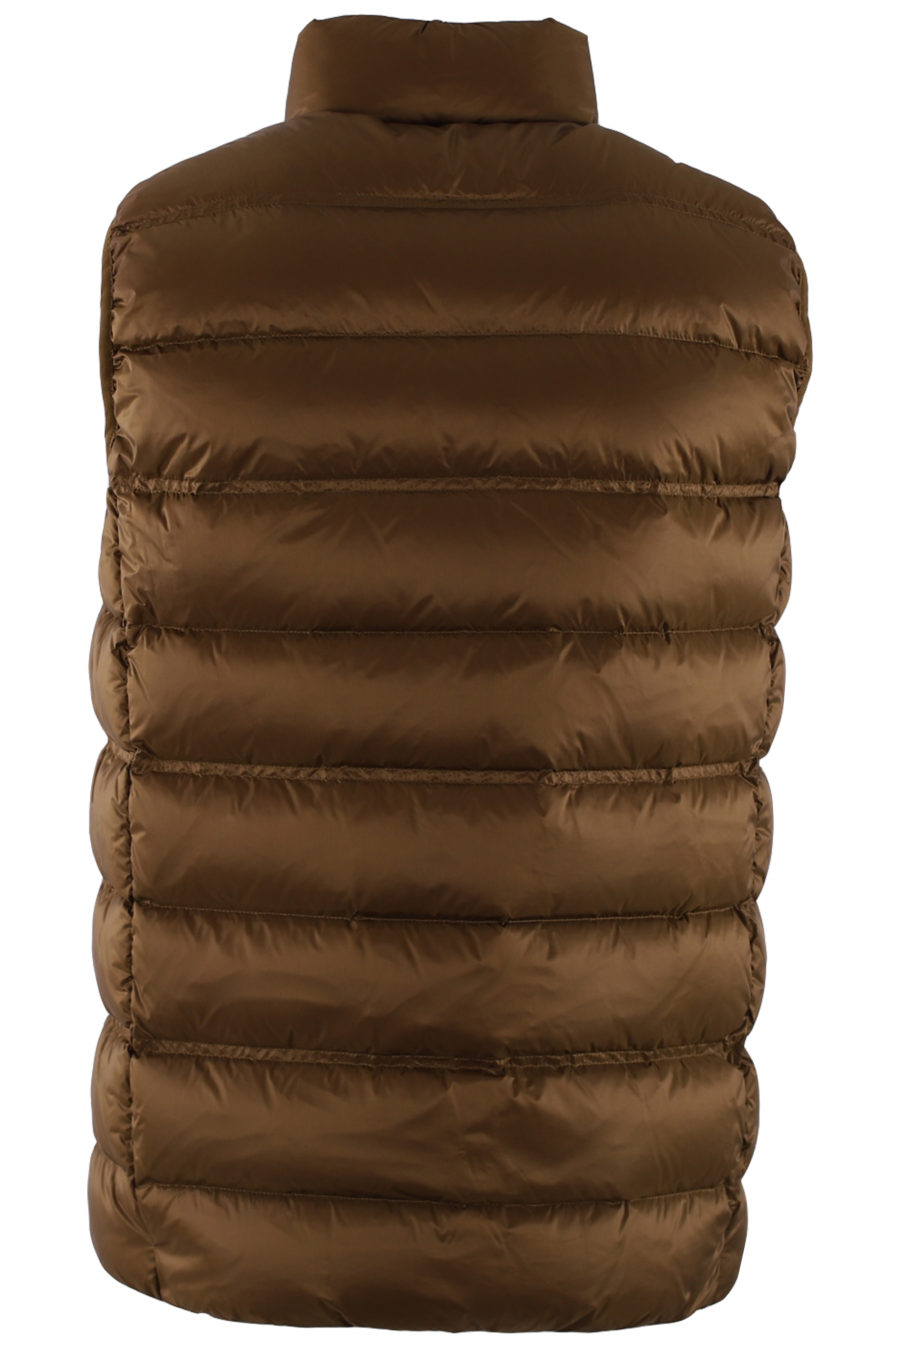 Brown quilted waistcoat - IMG 9417